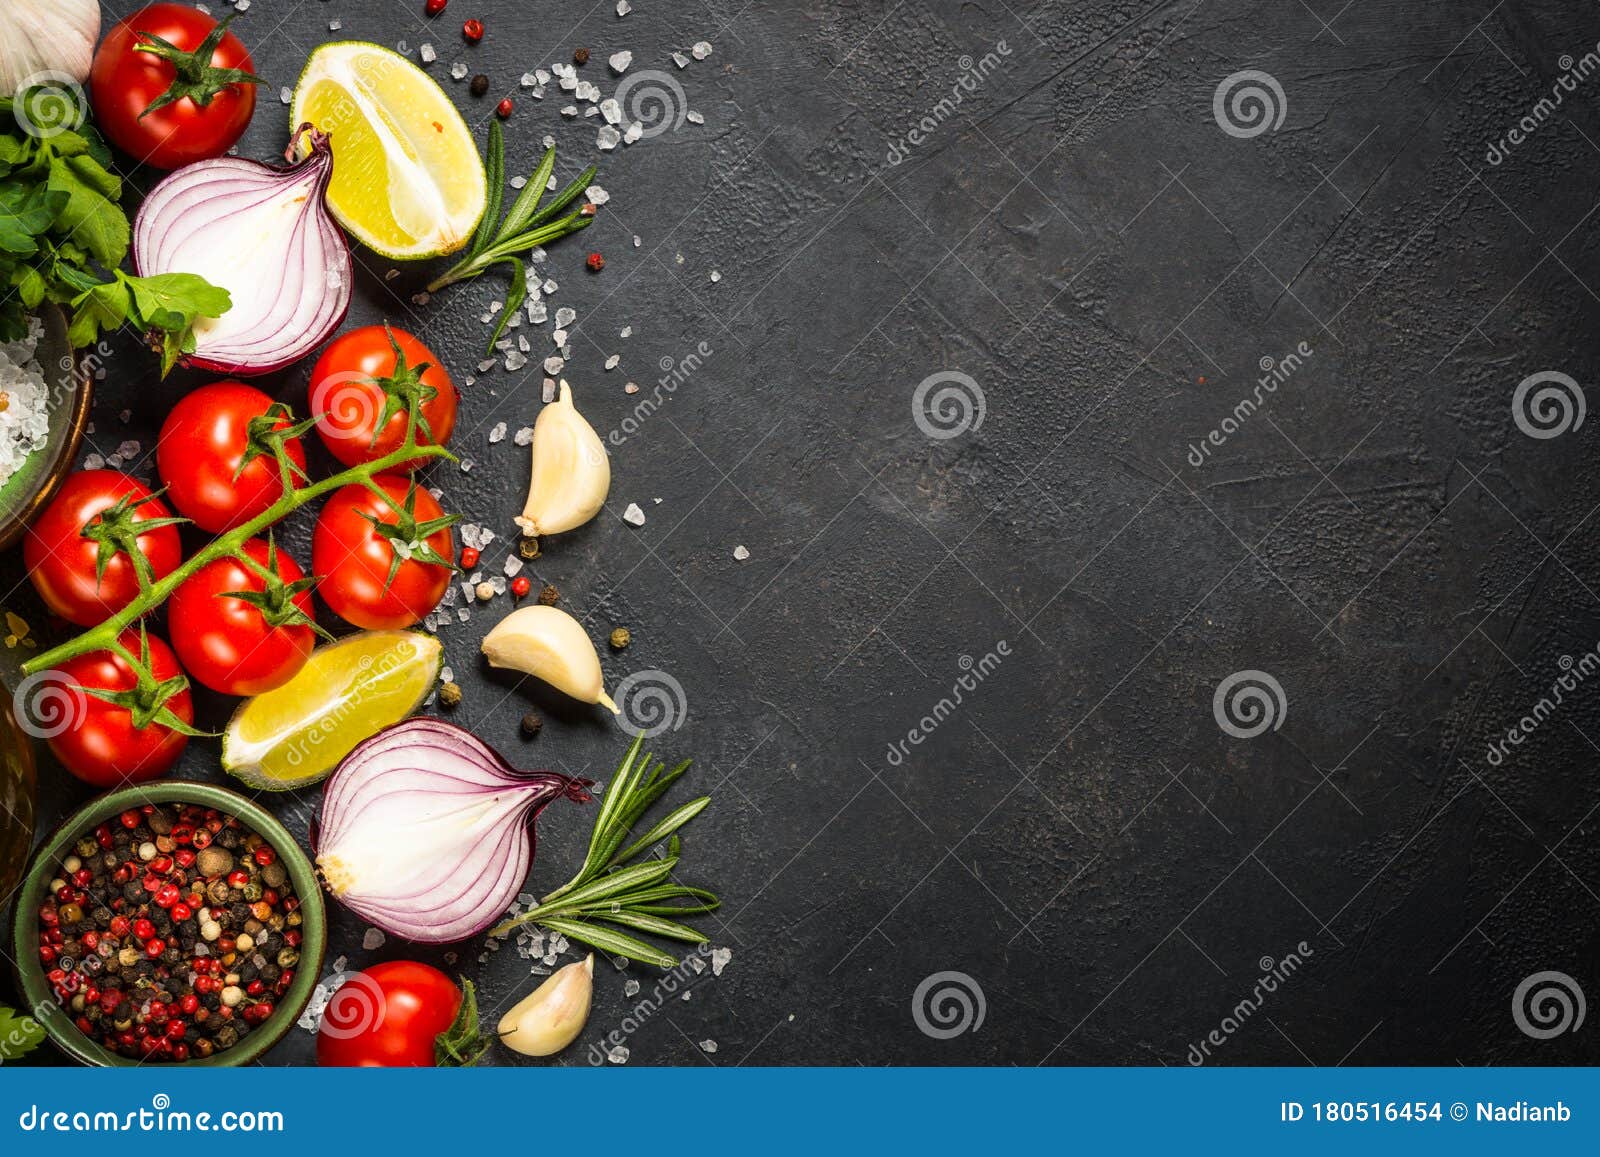 Food Cooking Background on Black Table. Stock Photo - Image of greens ...